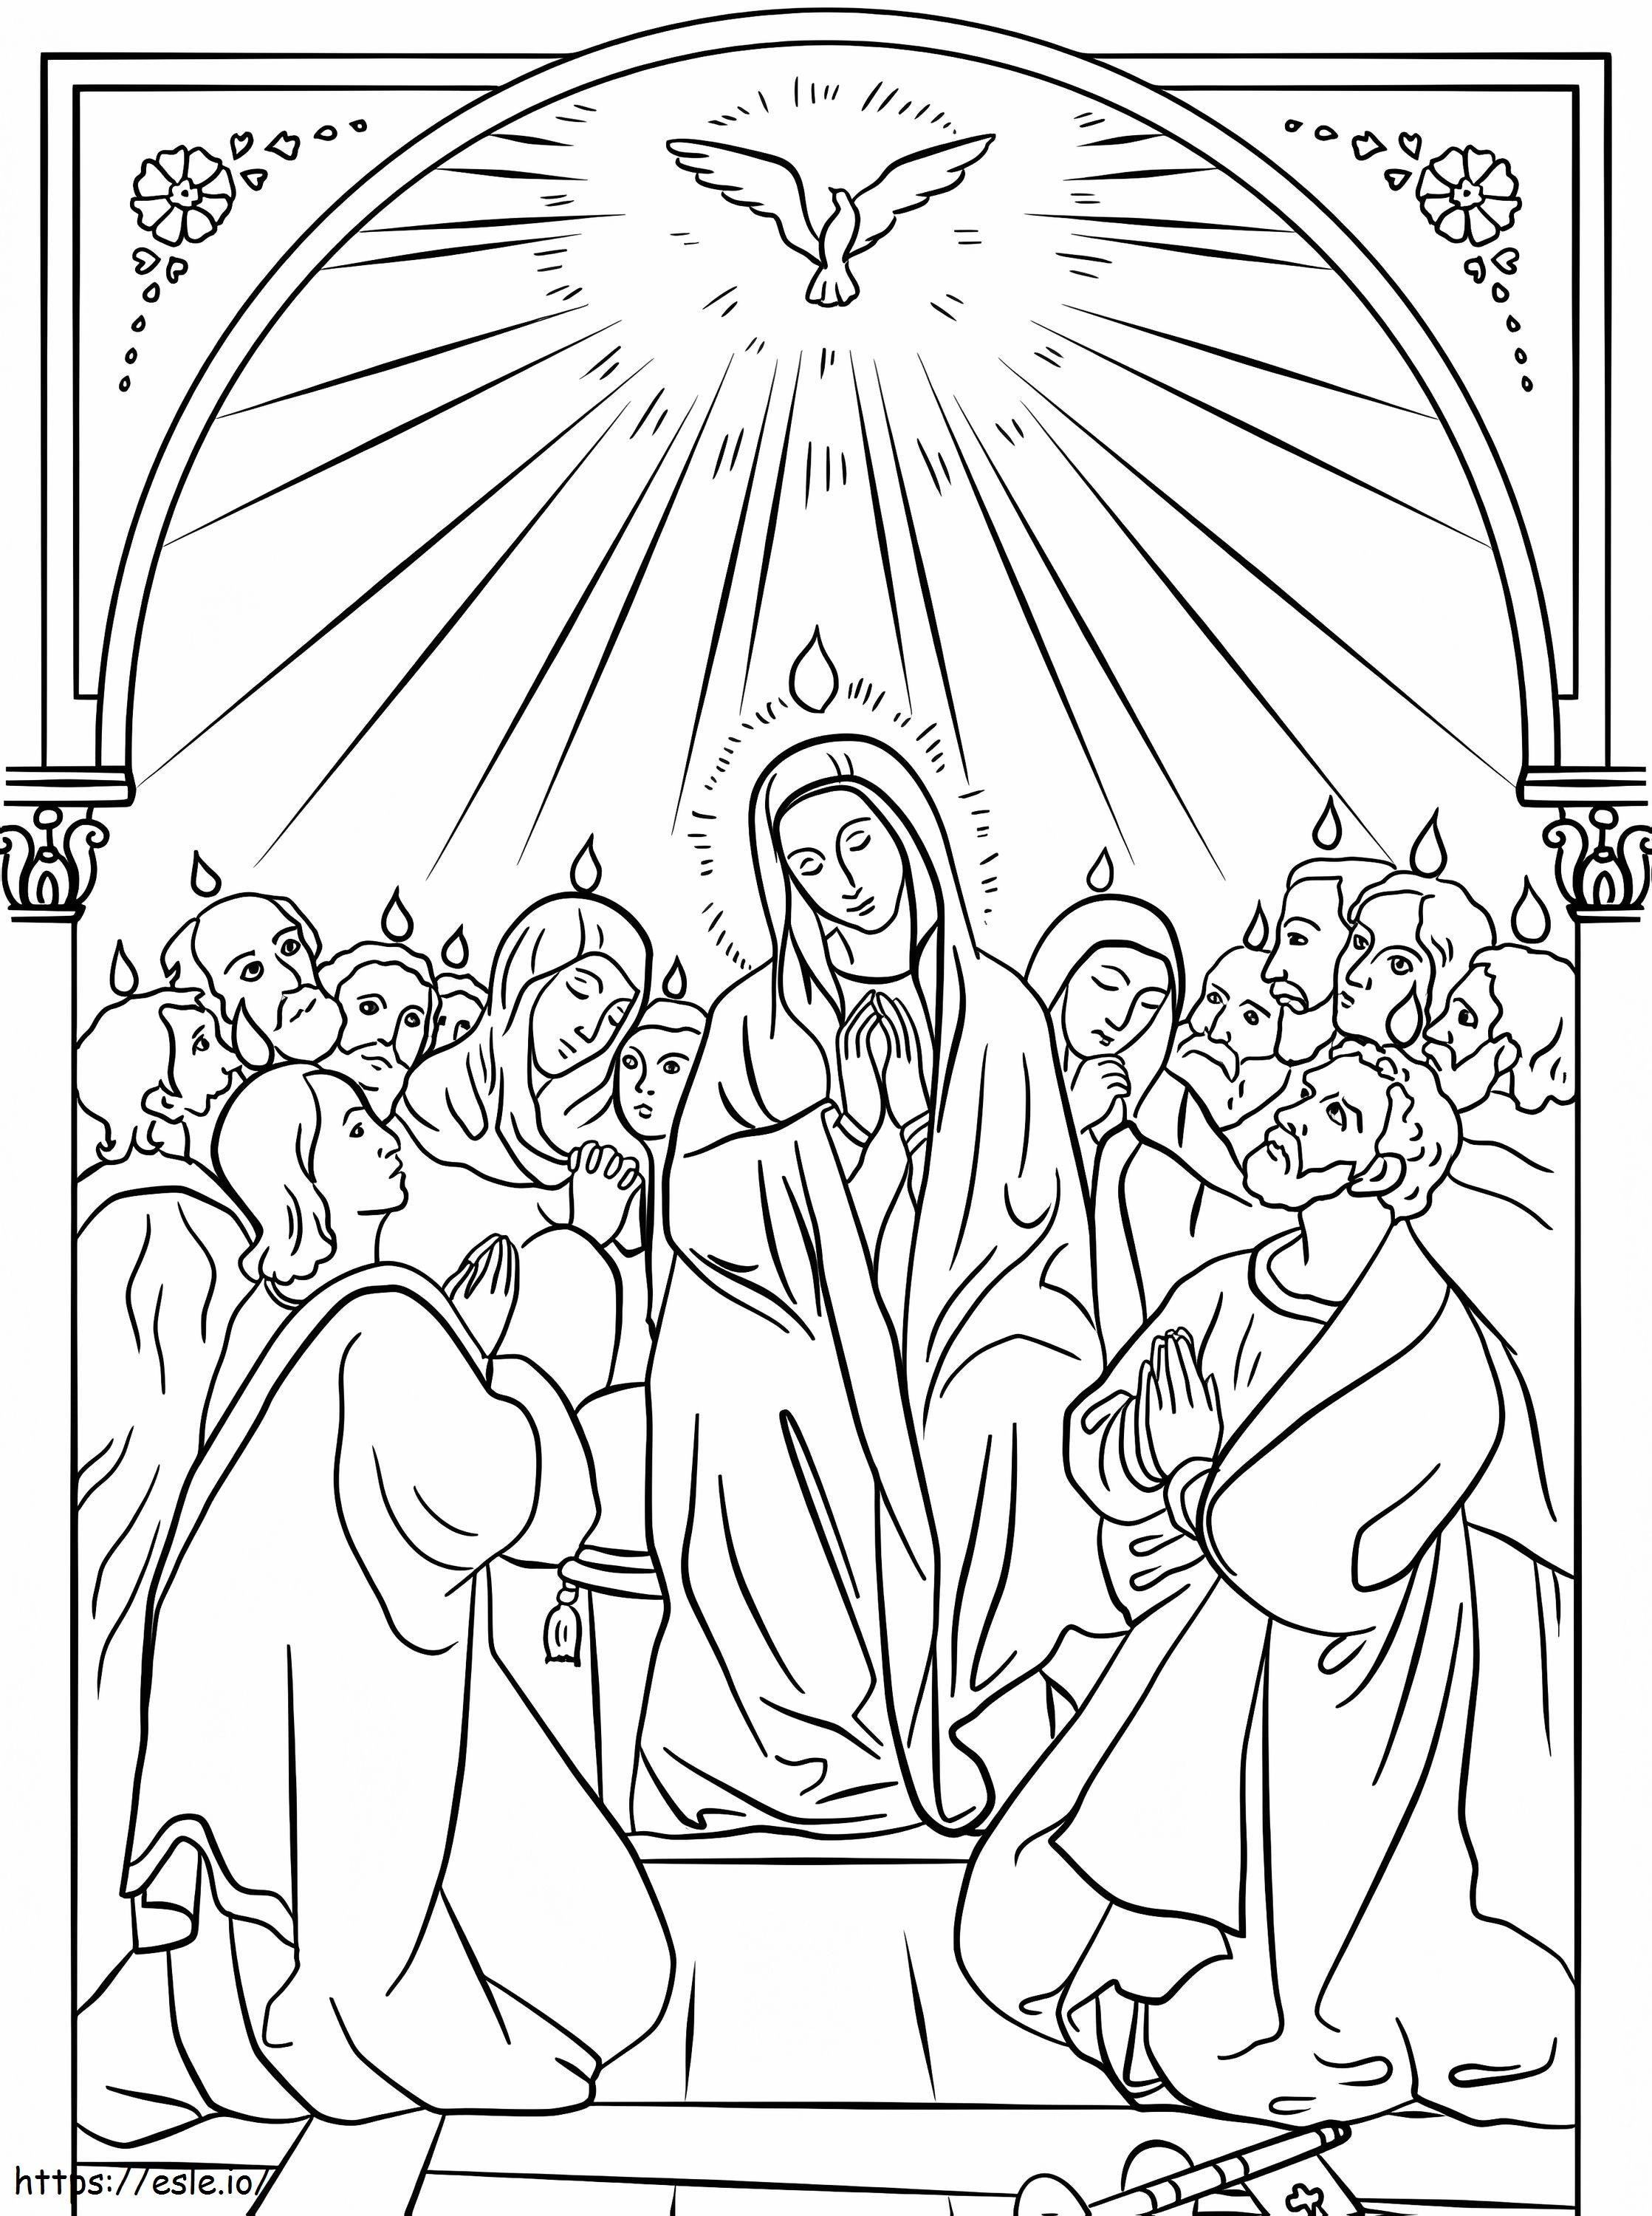 Pentecost Icon coloring page